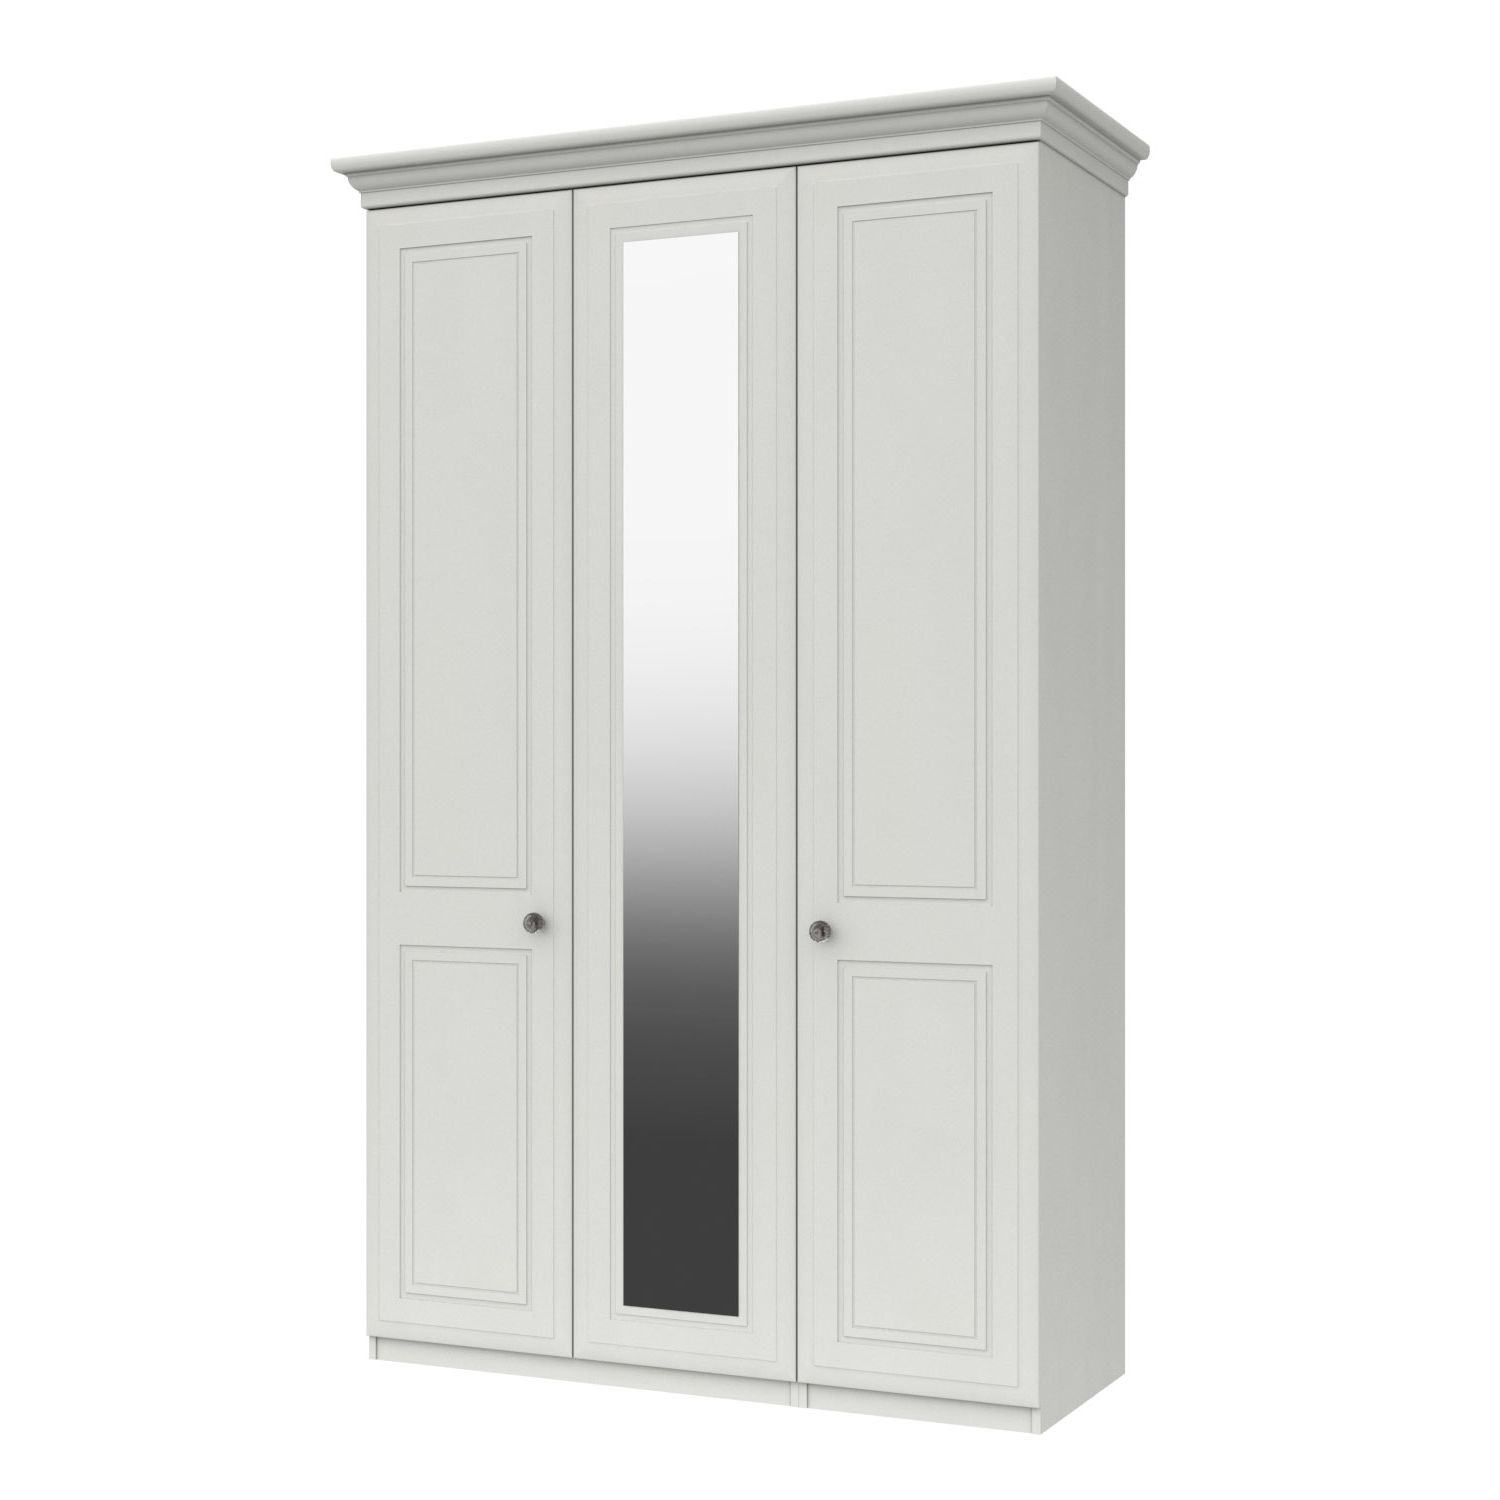 Tall 3 Door Wardrobe With Mirror – Tr Hayes Furniture Bath Pertaining To White 3 Door Mirrored Wardrobes (Gallery 11 of 20)